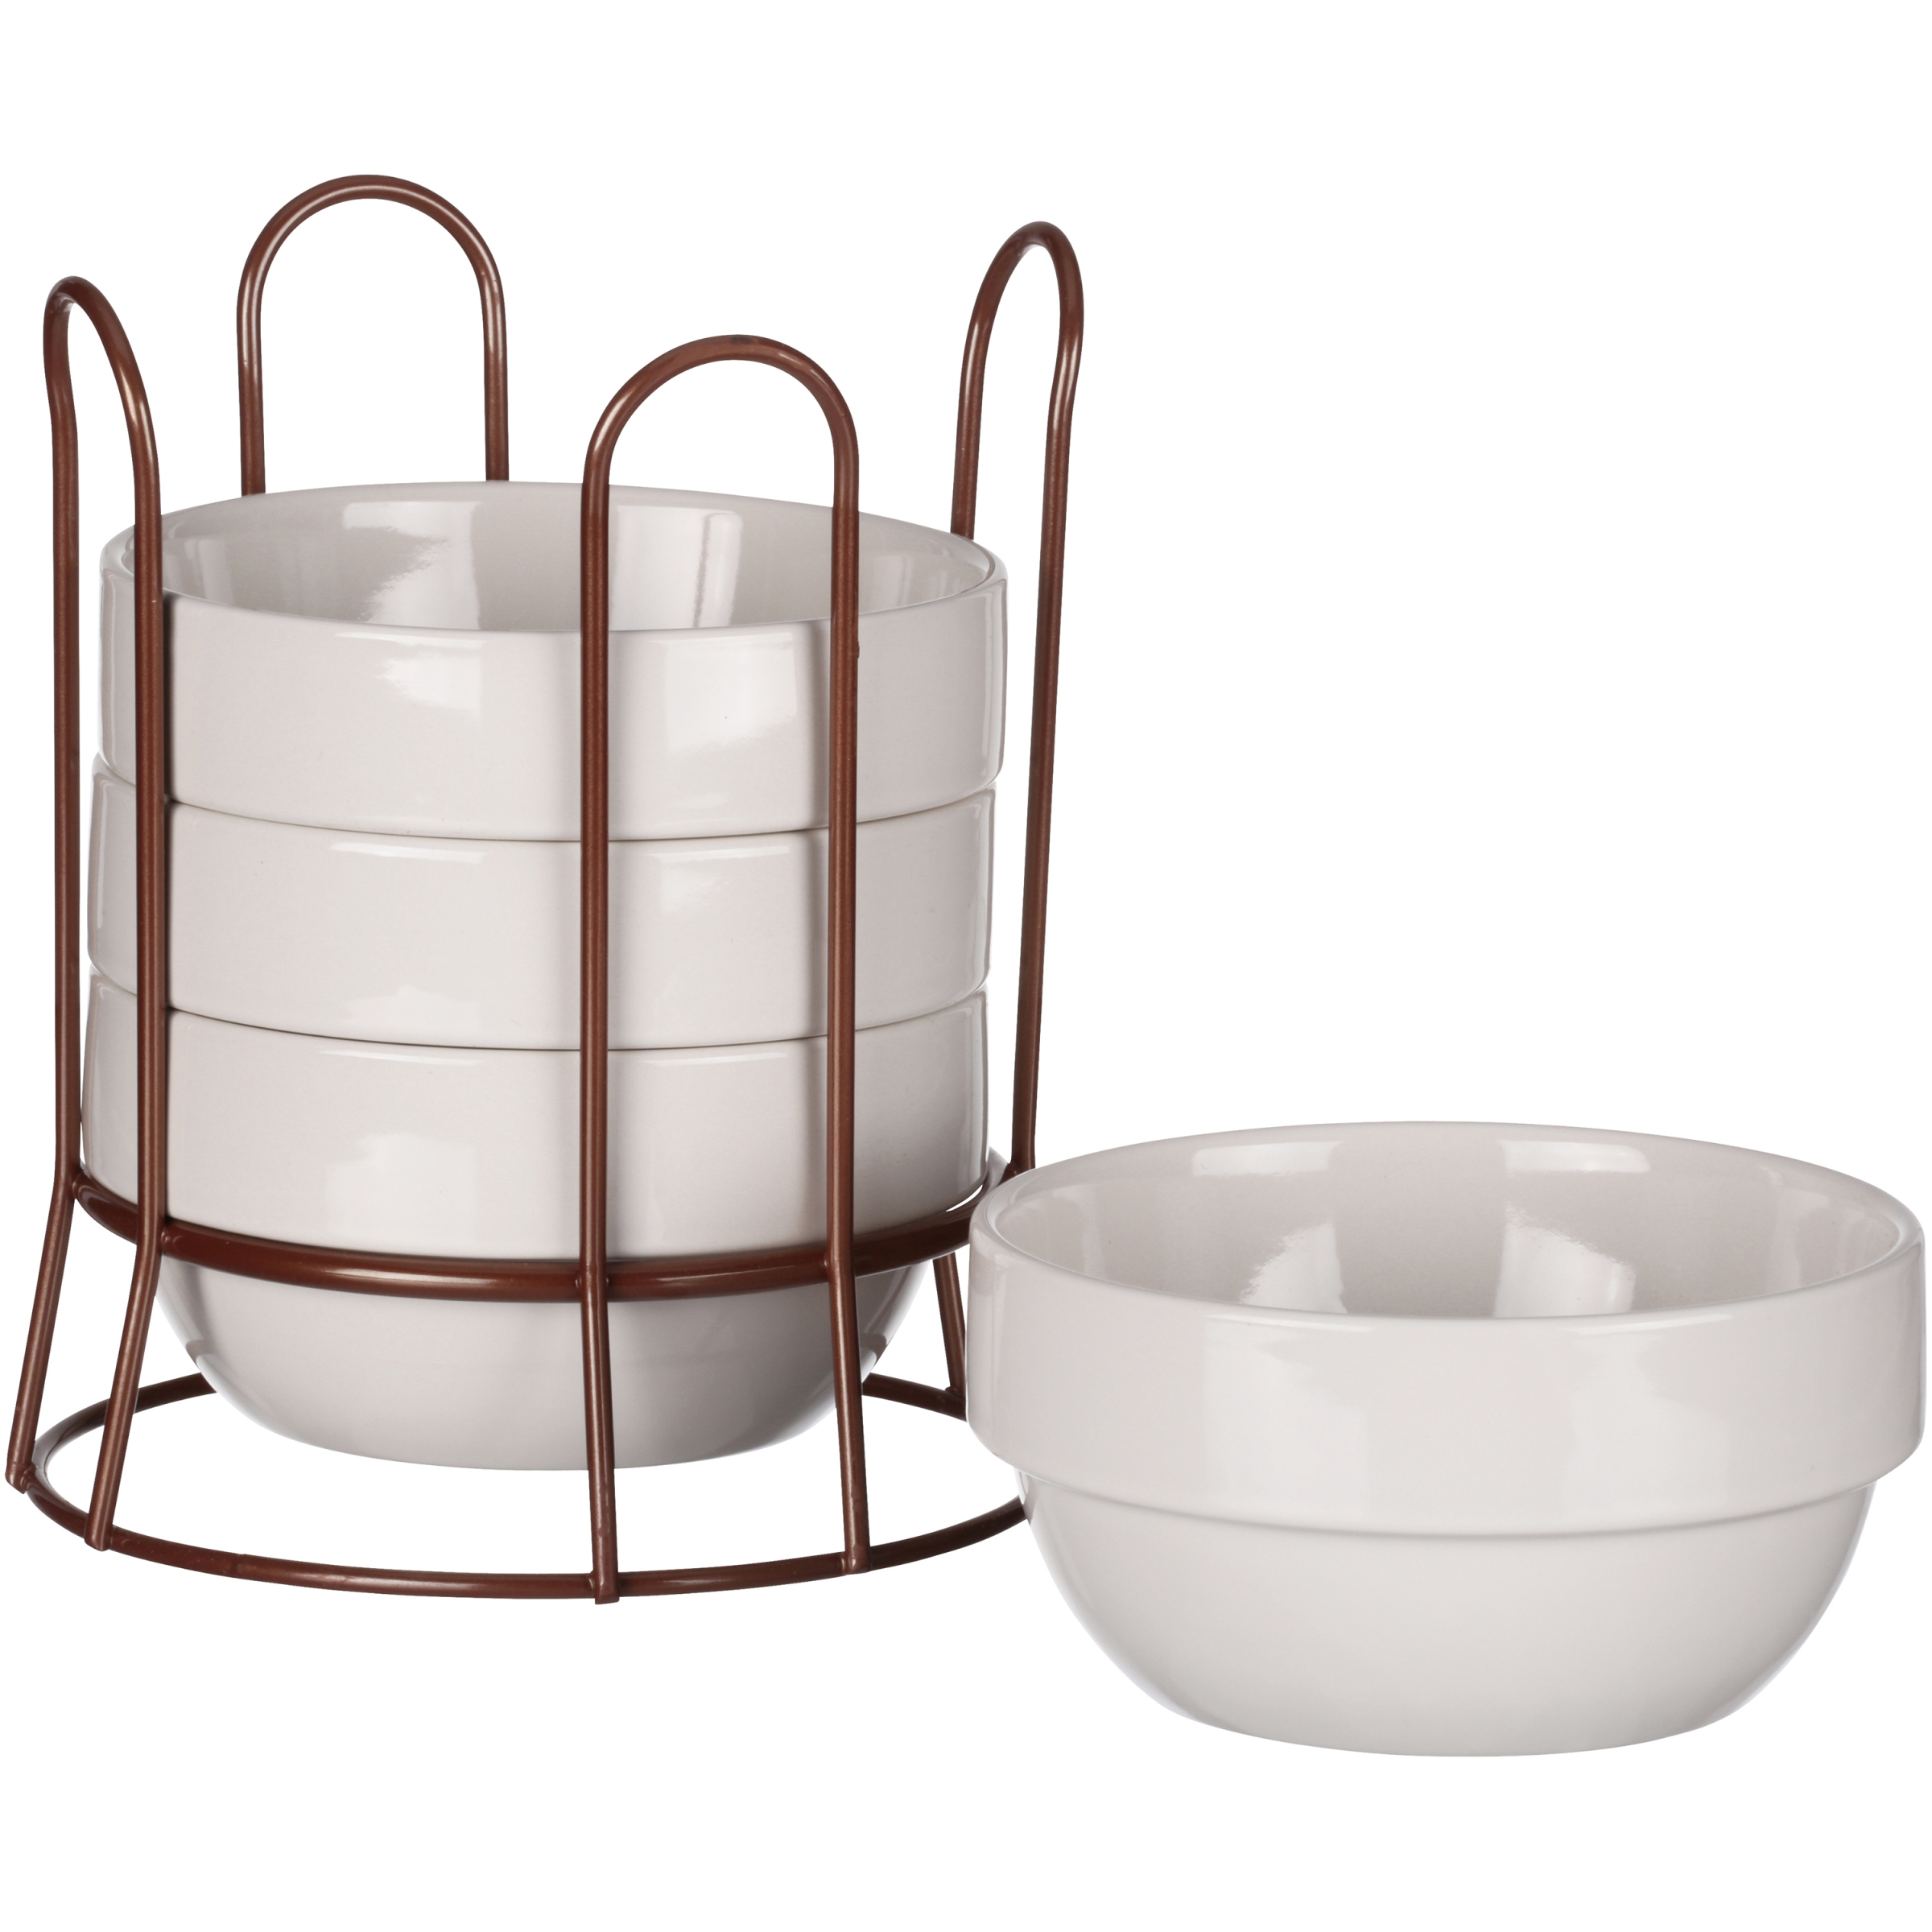 Mainstays 4 Piece Bowl with Copper Wire Rack Only $4.99! (Reg $14.86)